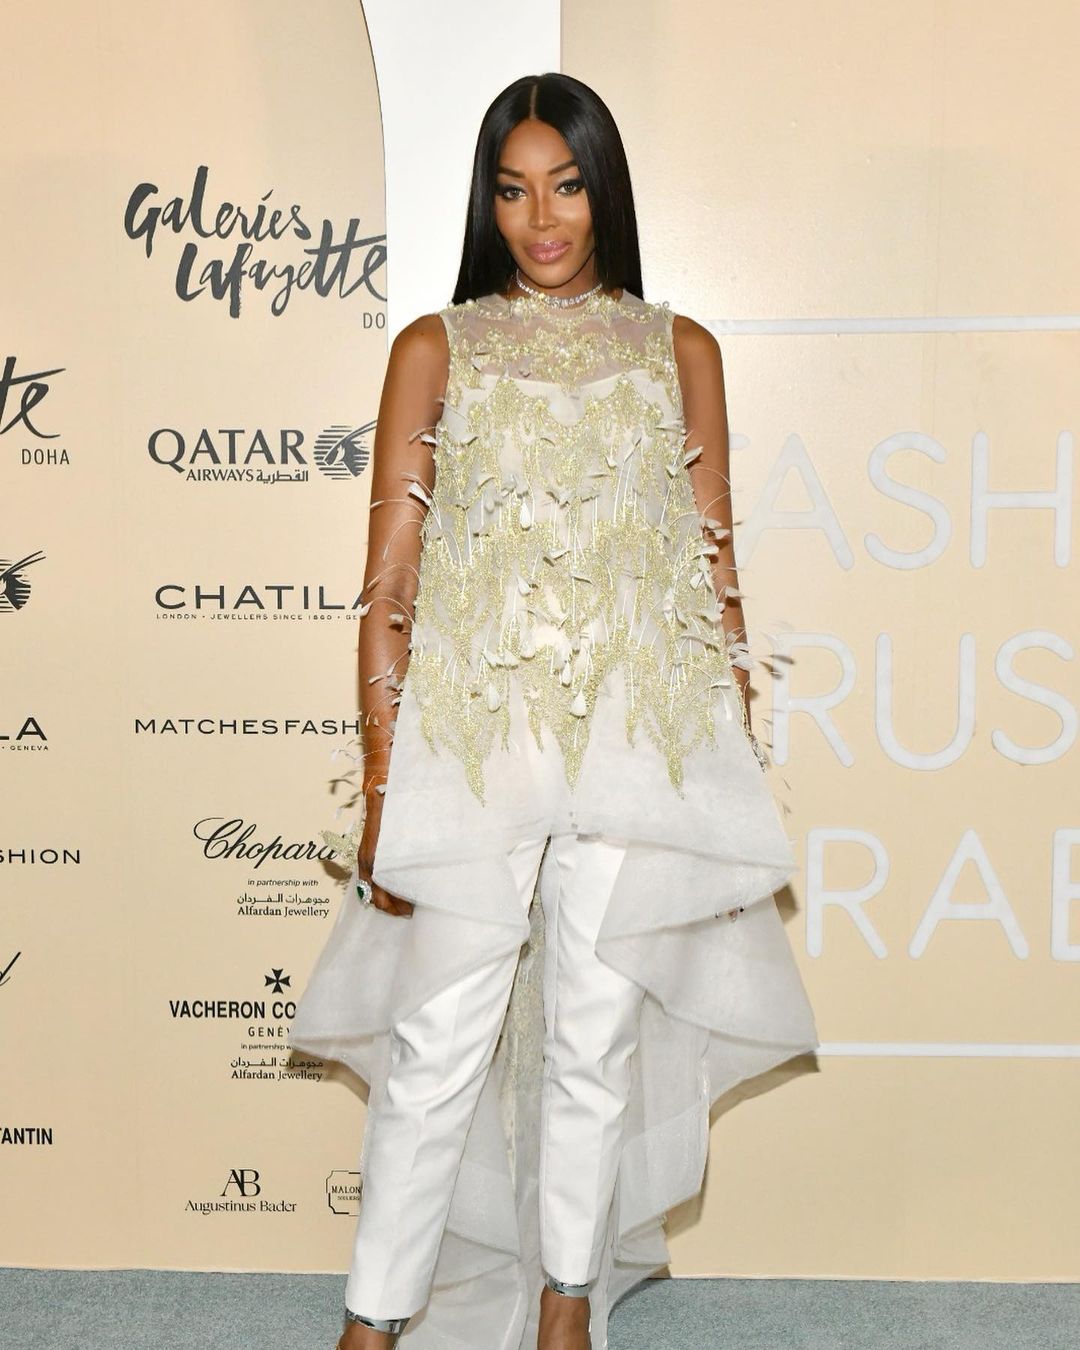 The Best Celebrity Fashion Moments This Week